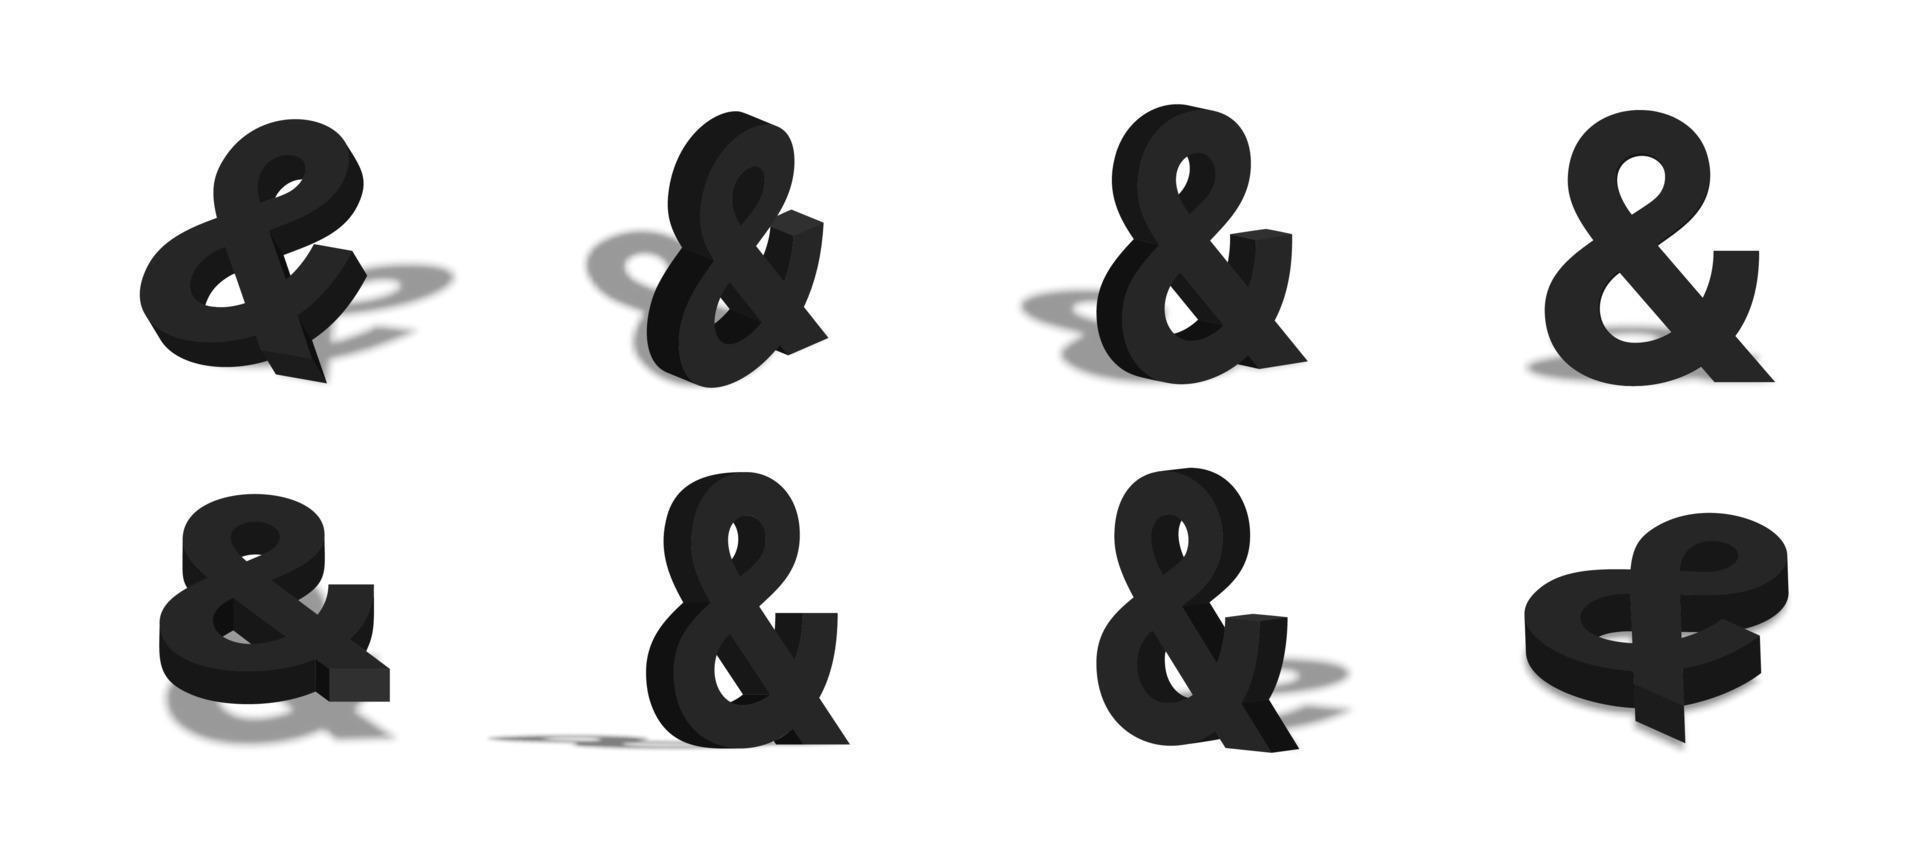 Black ampersand 3d icon illustration with different views and angles vector